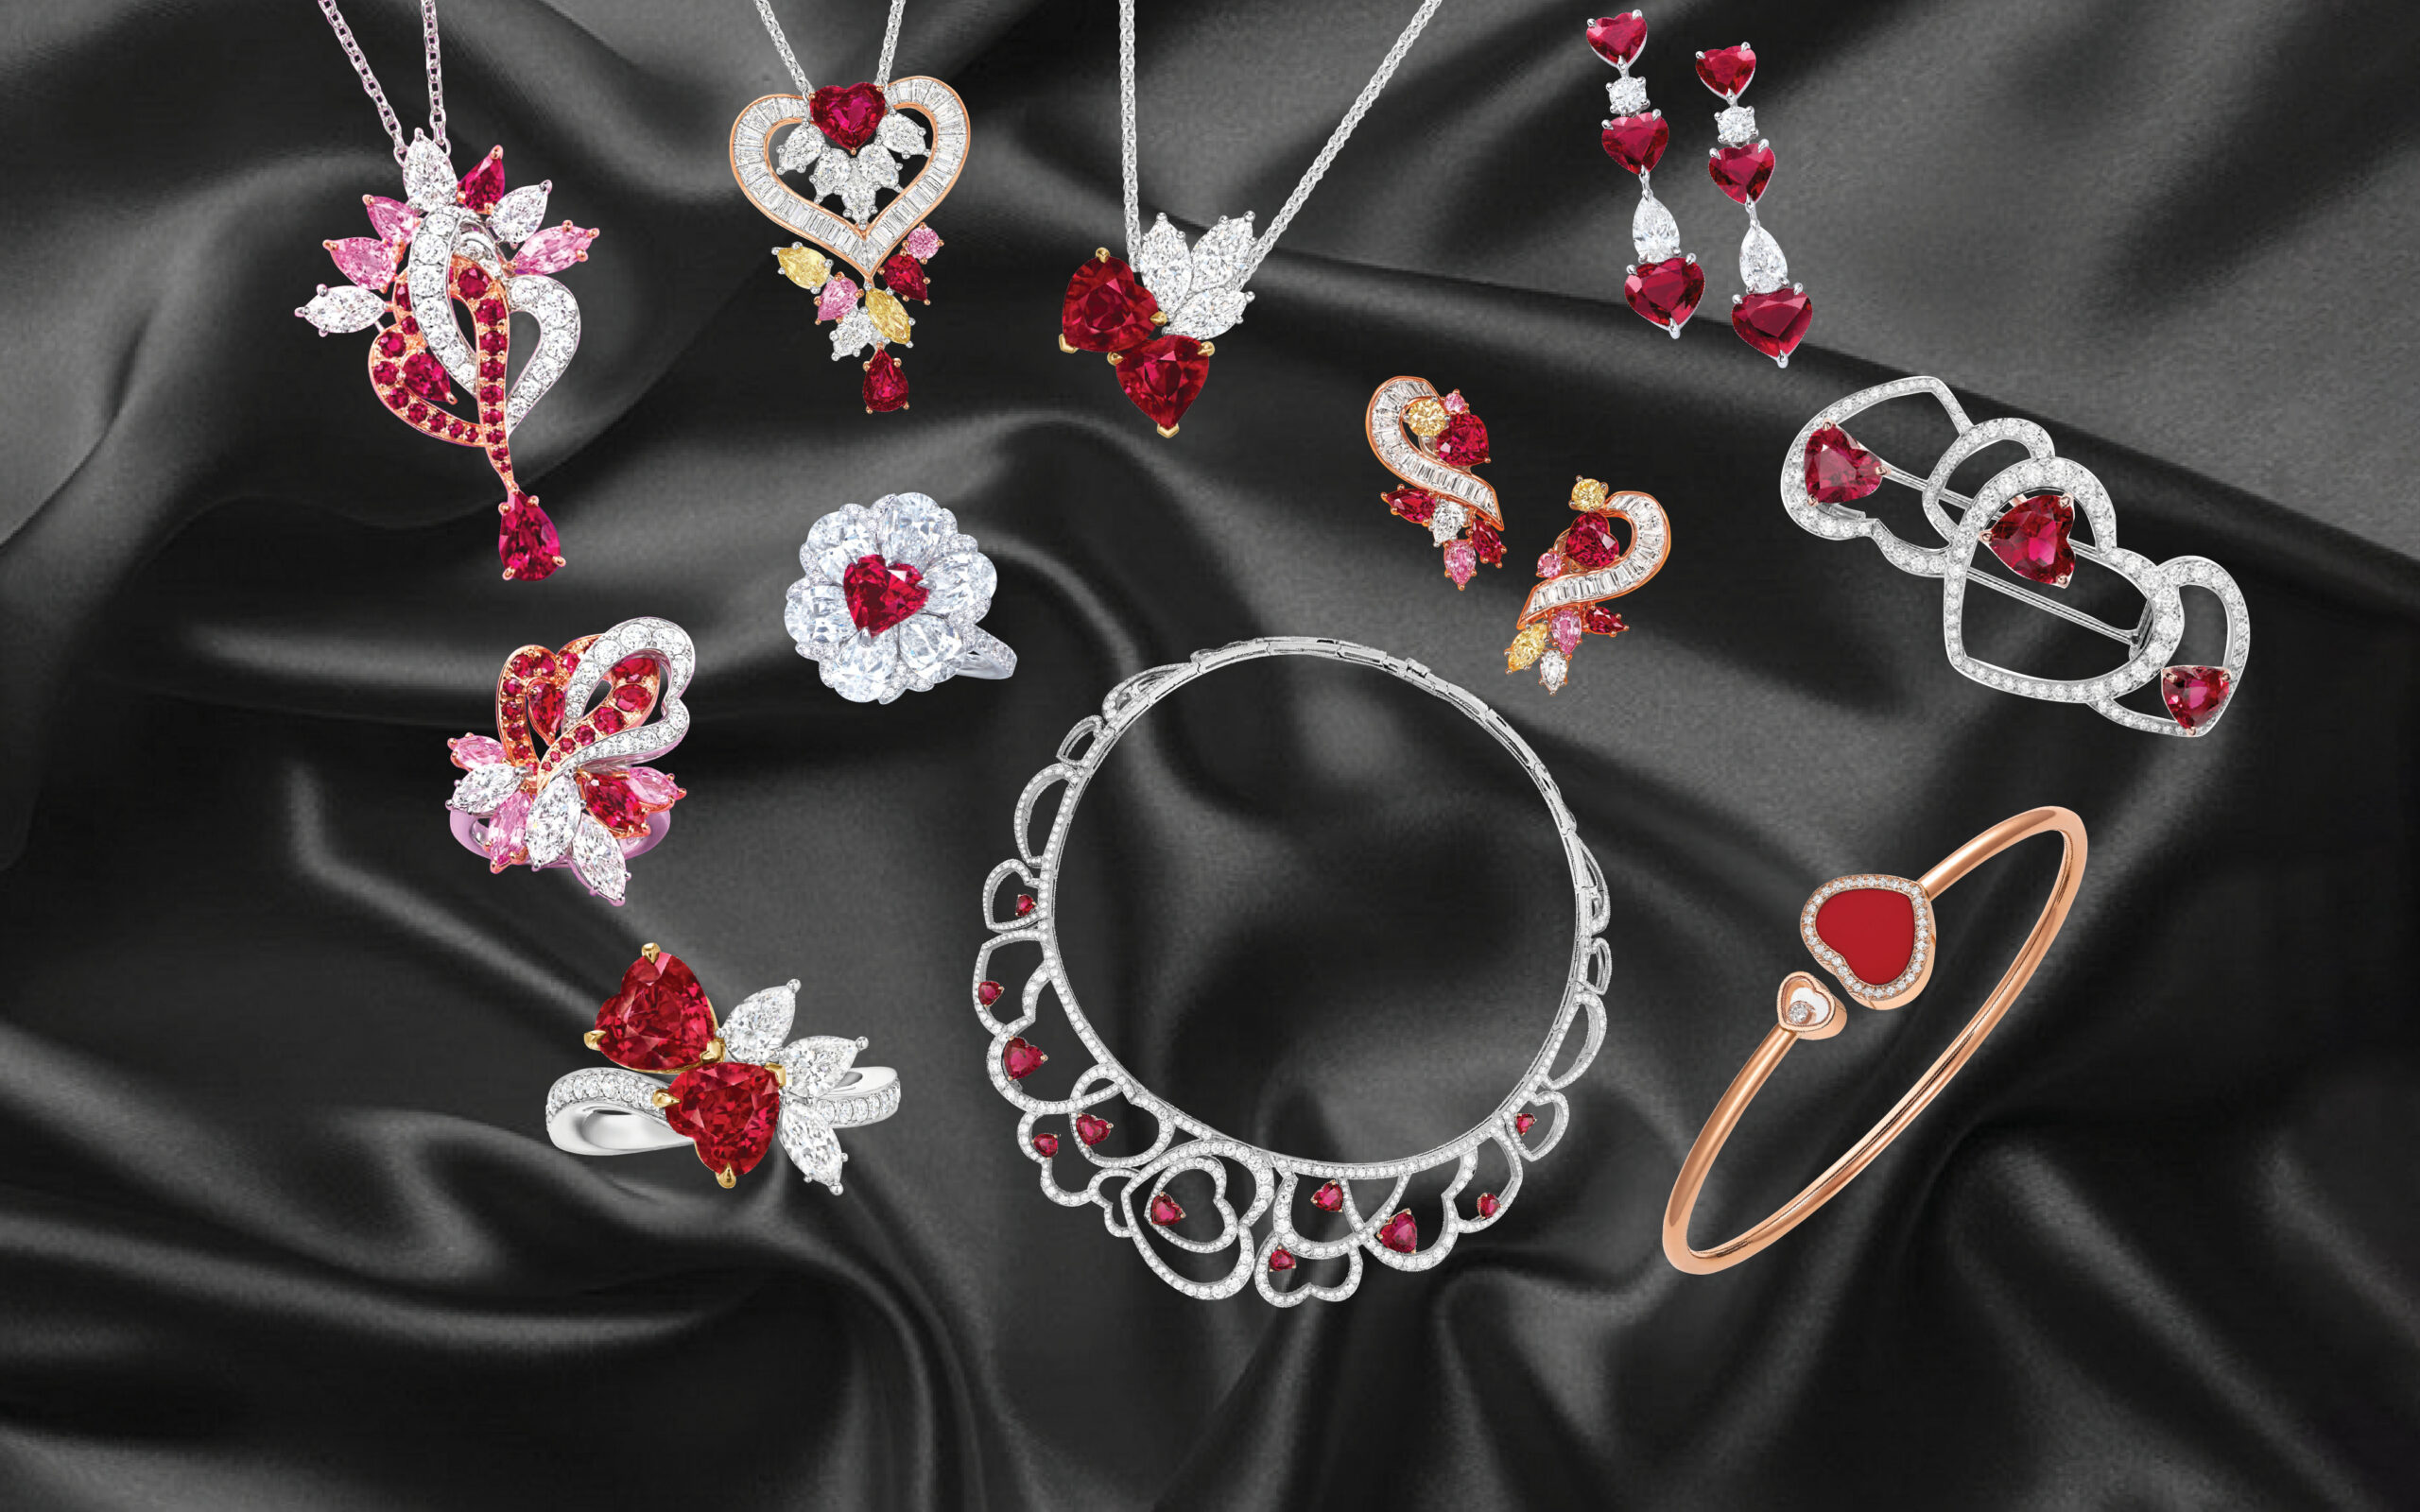 Heart Gallery – right Heart’s Day gifts spark a positive emotion and work all year round